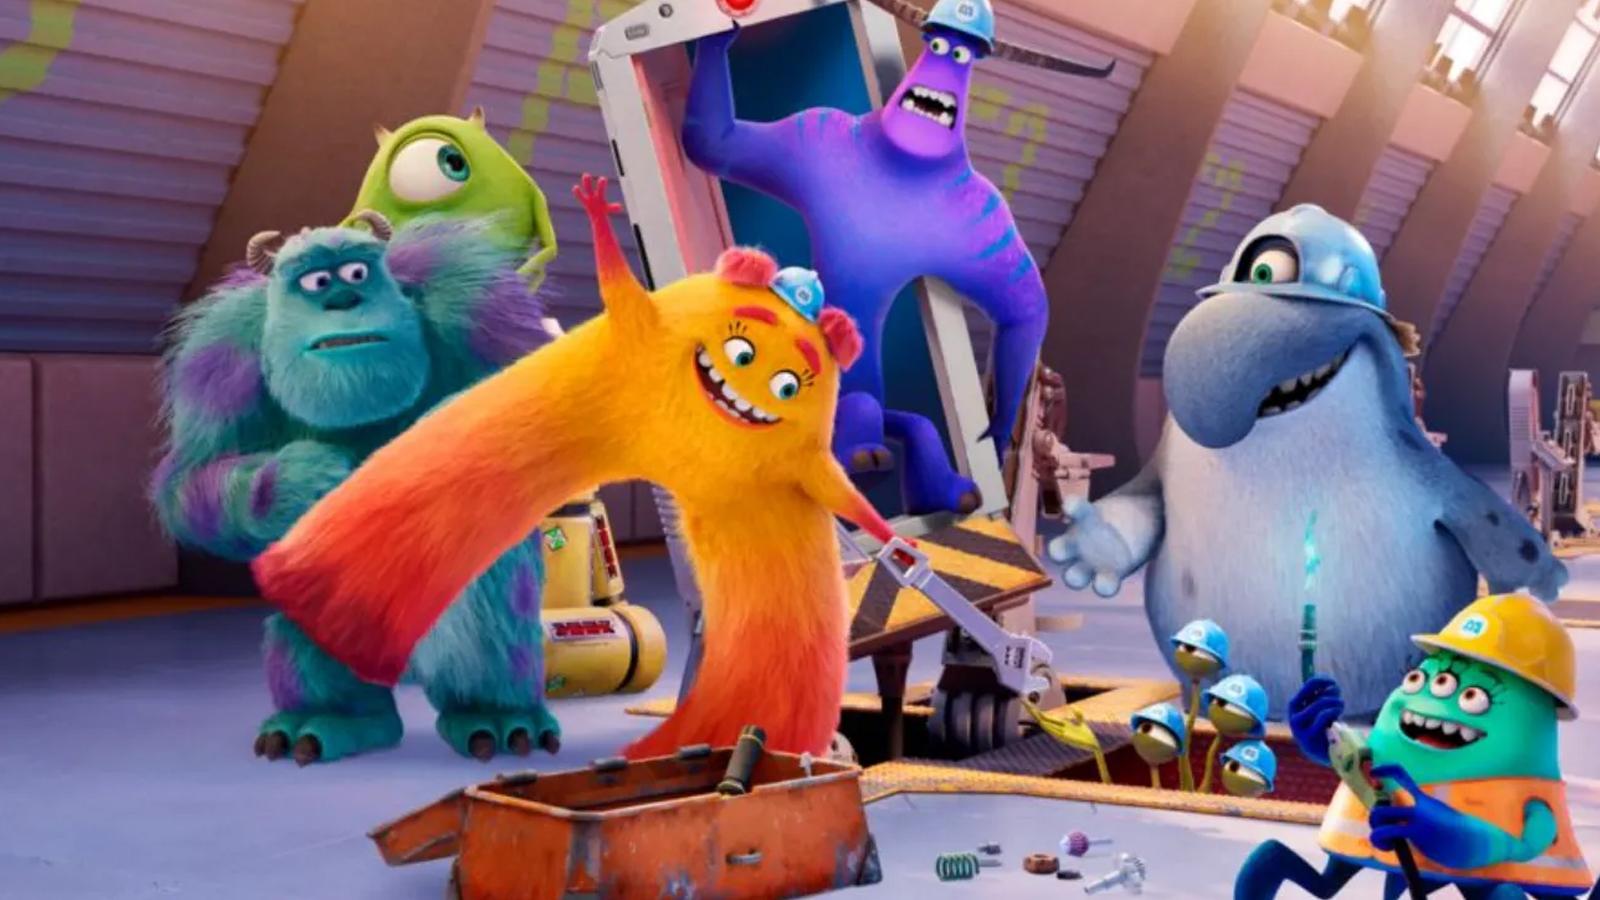 Disney's 'Monsters at Work' Season Two Guest Cast Unveiled At New York  Comic Con – Deadline